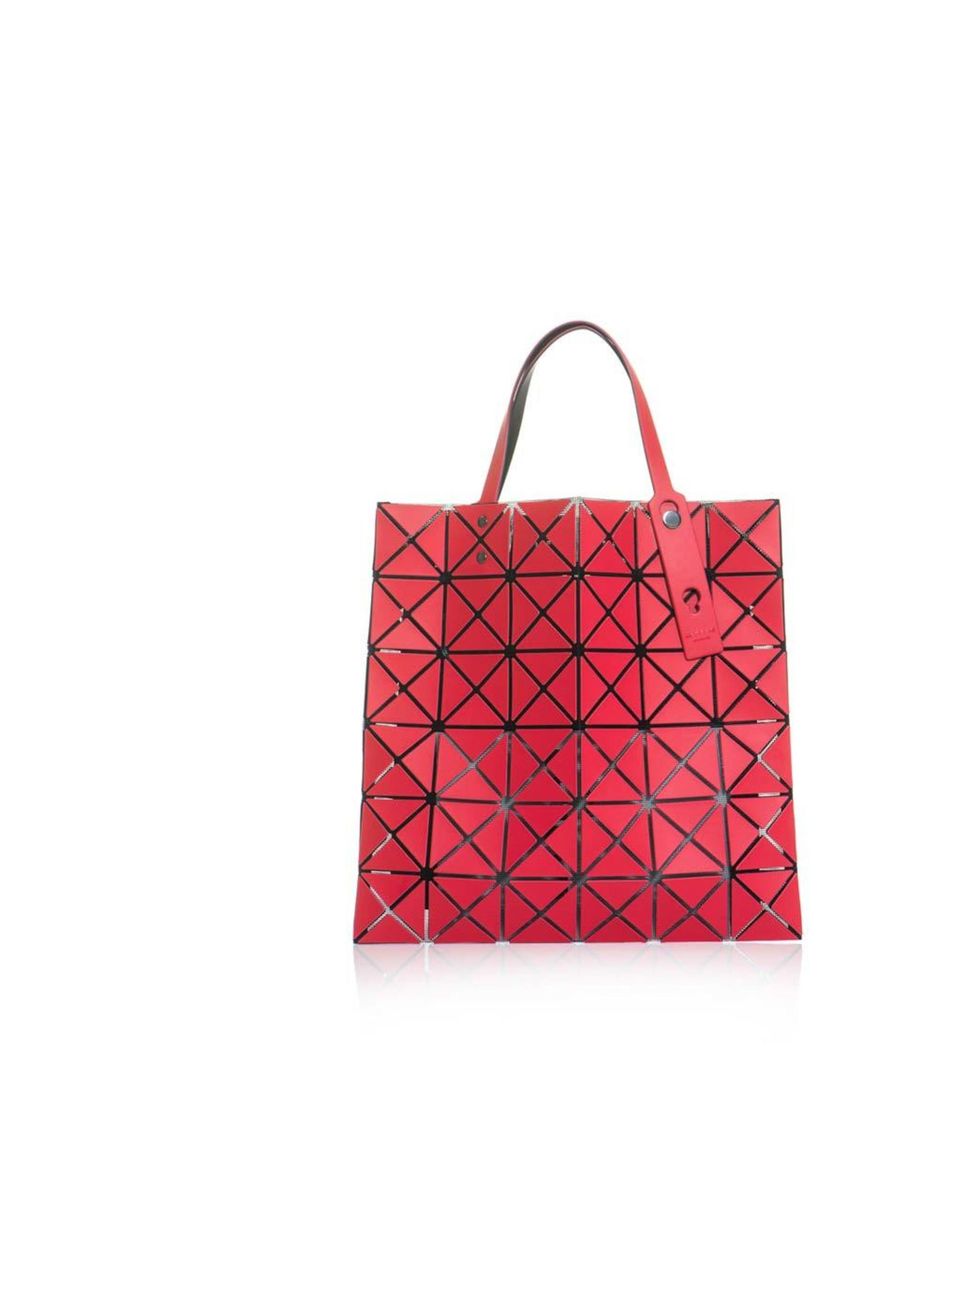 <p>Inject a little colour into your everyday style with this quirky tote.</p><p>Bao Bao Issey Miyake bag, £325 at <a href="http://www.matchesfashion.com/product/161494?qxjkl=tsid:30065%7Ccat:0RpXOIXA500">MatchesFashion.com</a></p>